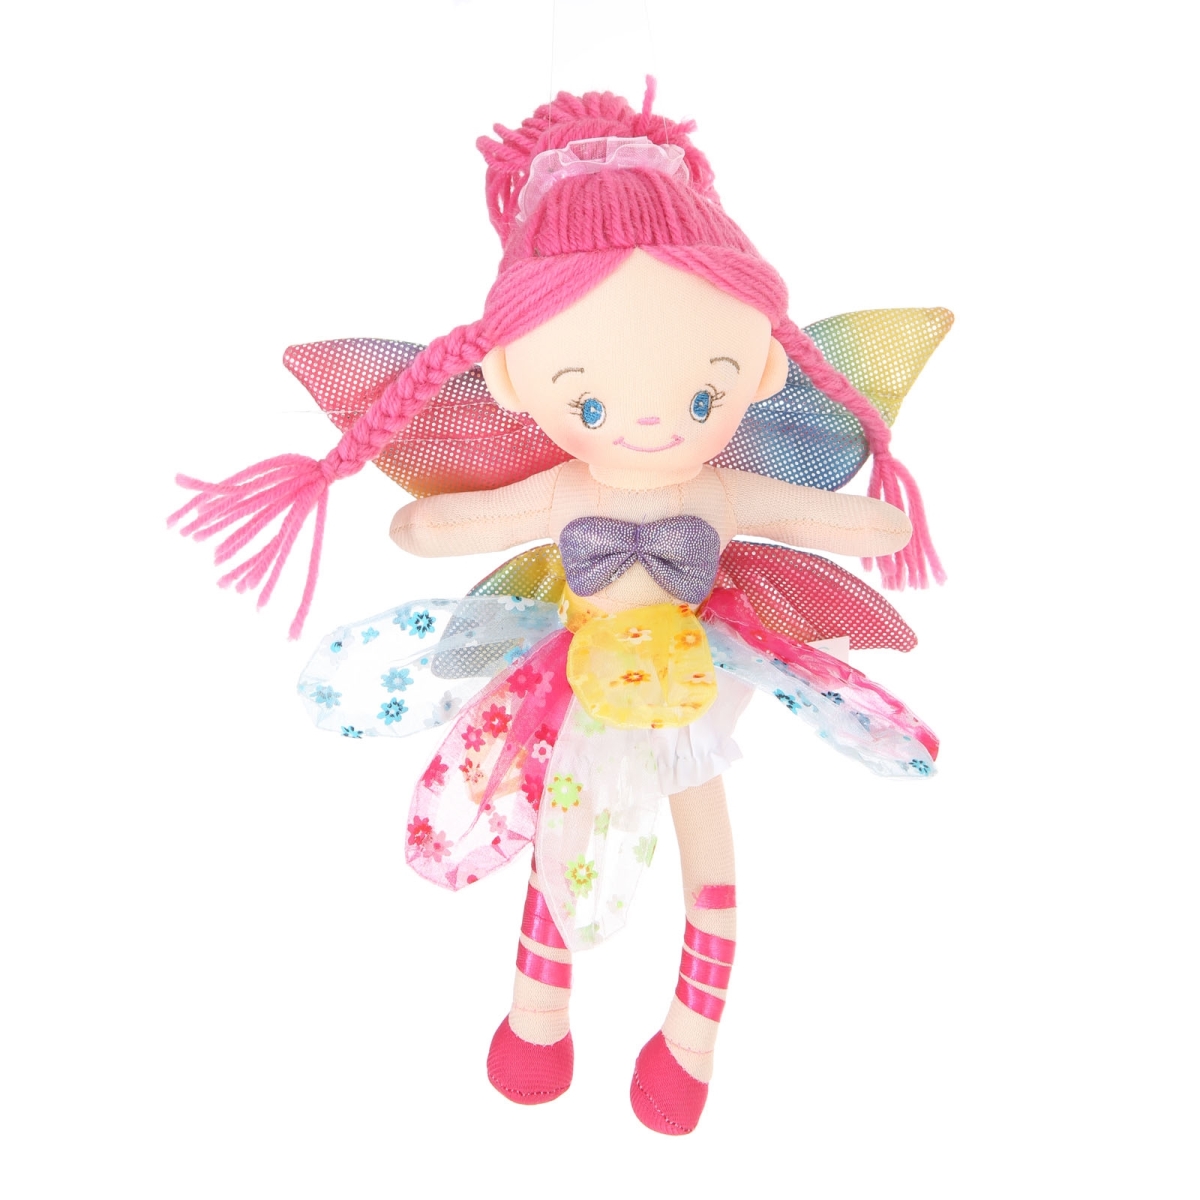 Mm08 12 In. Plush Haired Fairy Doll - Pink